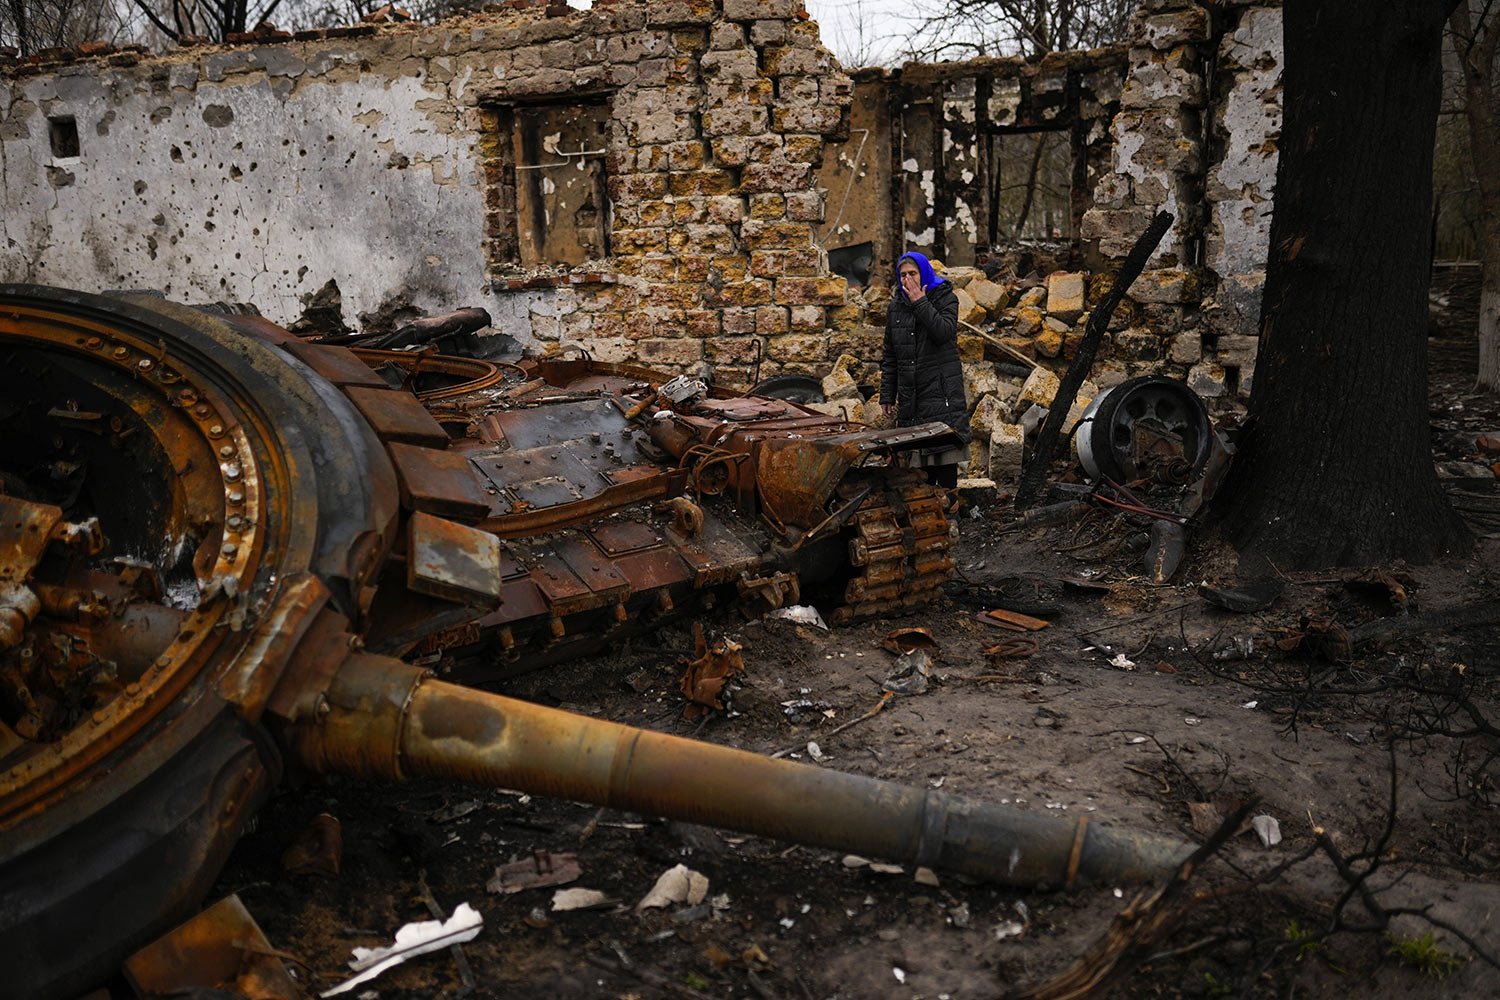  Valentyna Sherba, 68, stands next to a Russian tank in the backyard of her father's home, both destroyed, in the aftermath of a battle between Russian and Ukrainian troops on the outskirts of Chernihiv in northern Ukraine, Saturday, April 23, 2022. 